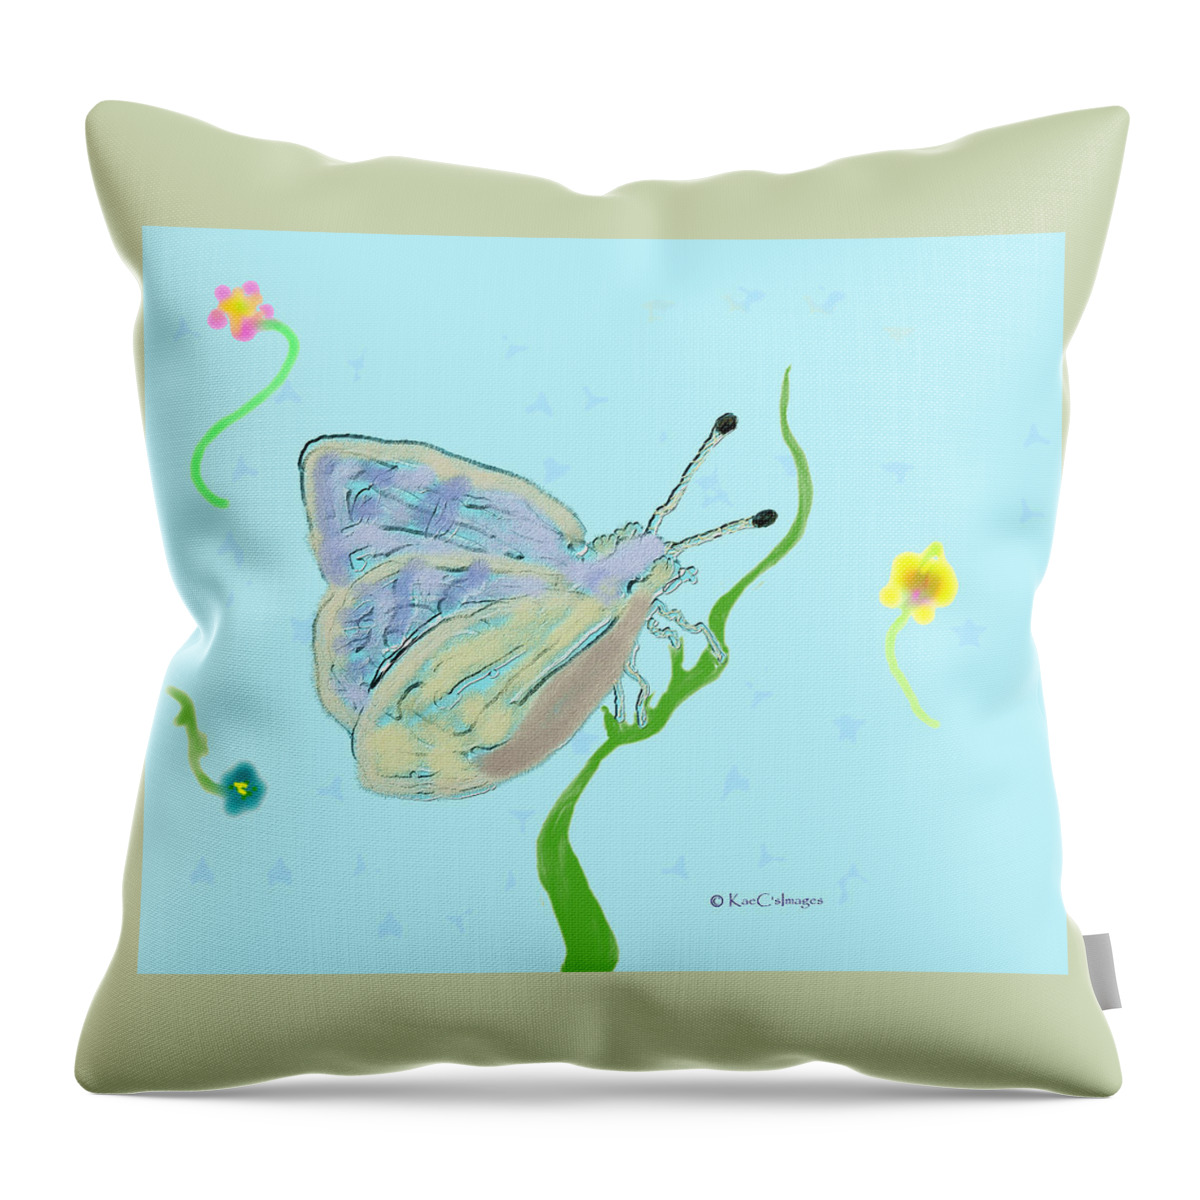 Butterfly Throw Pillow featuring the digital art Butterfly Allusion by Kae Cheatham